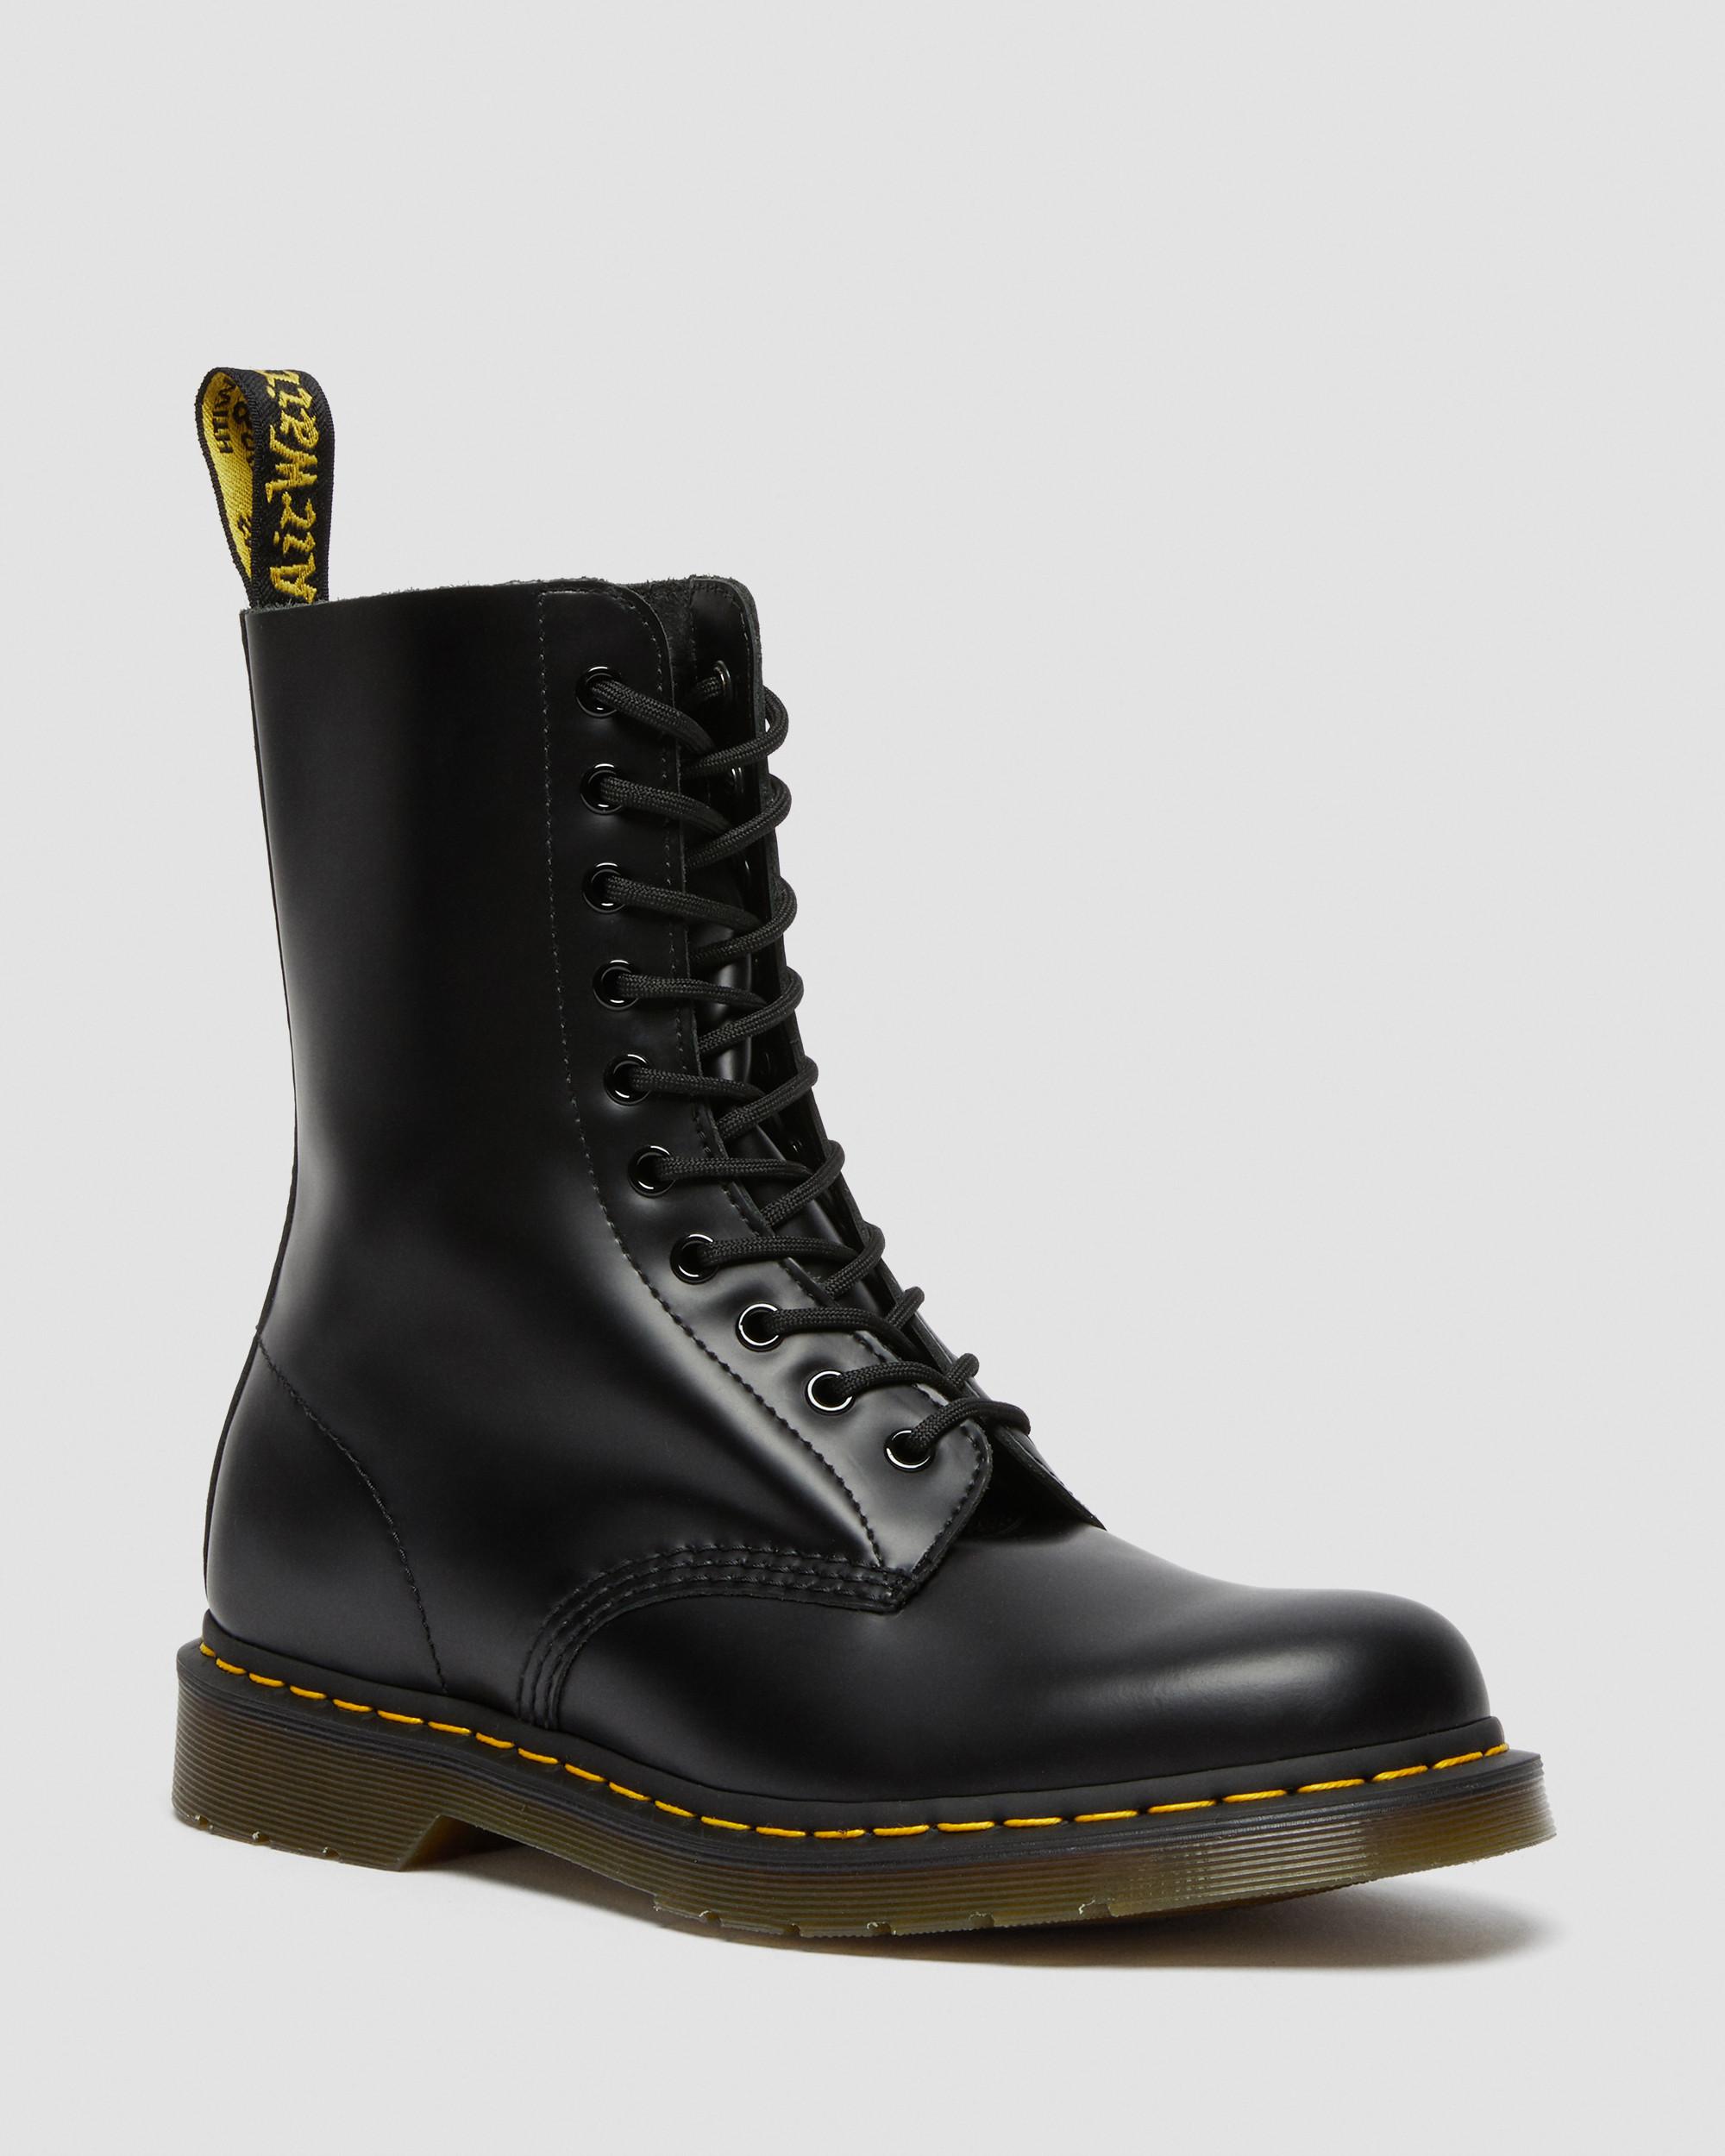 Productie Dynamiek Wiens 1490 Smooth Leather High Lace Up Boots | Dr. Martens